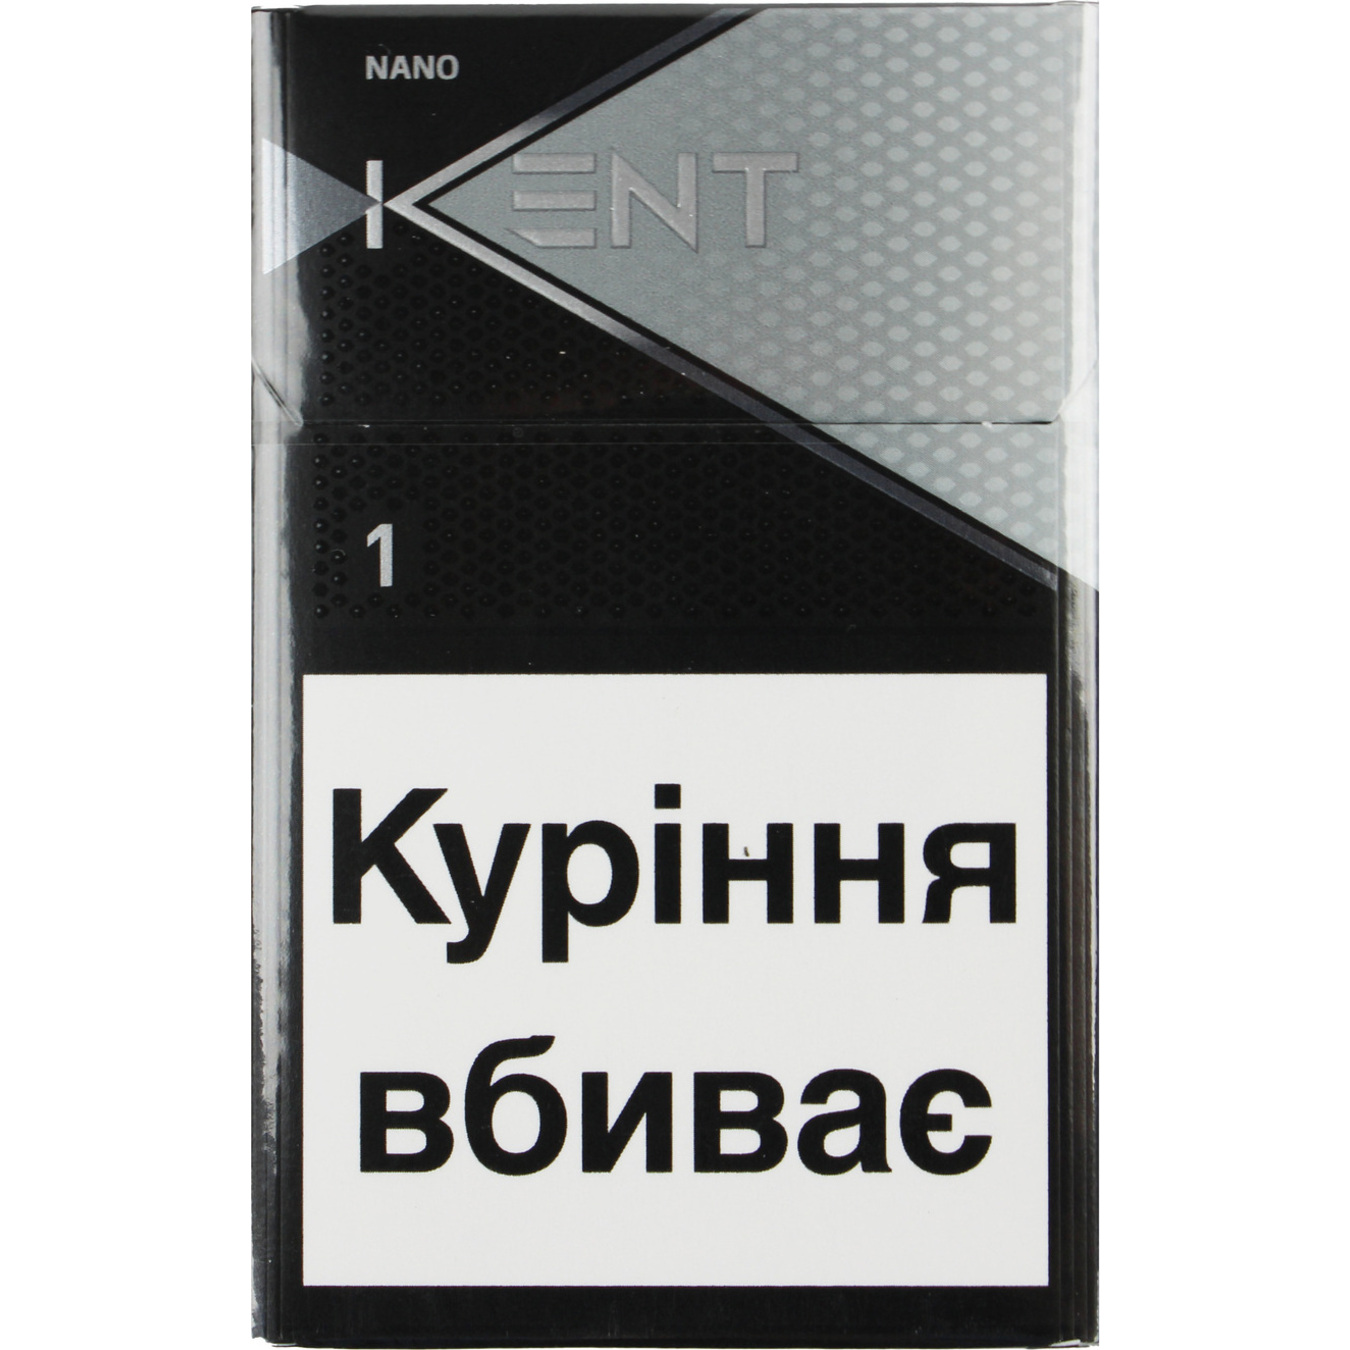 Kent Nanotek White Cigarettes 20 pcs (the price is indicated without excise tax)